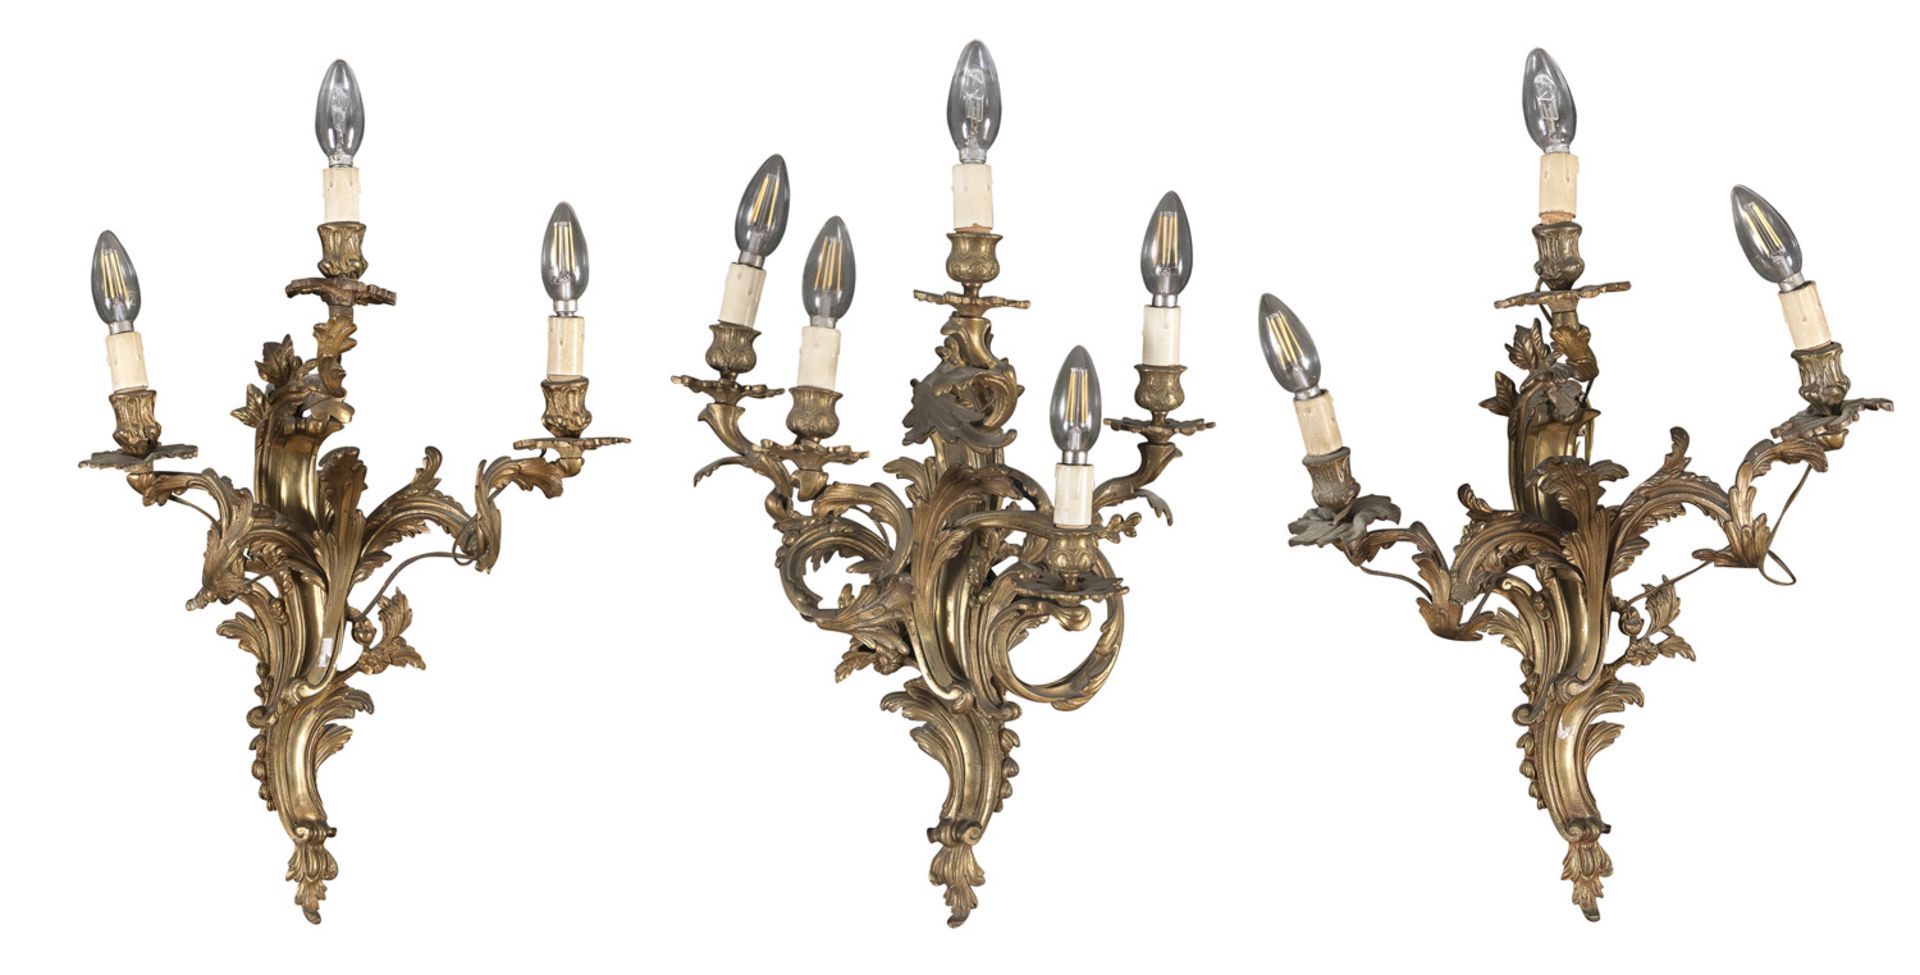 THREE APPLIQUES IN GILDED BRONZE EARLY 19TH CENTURY